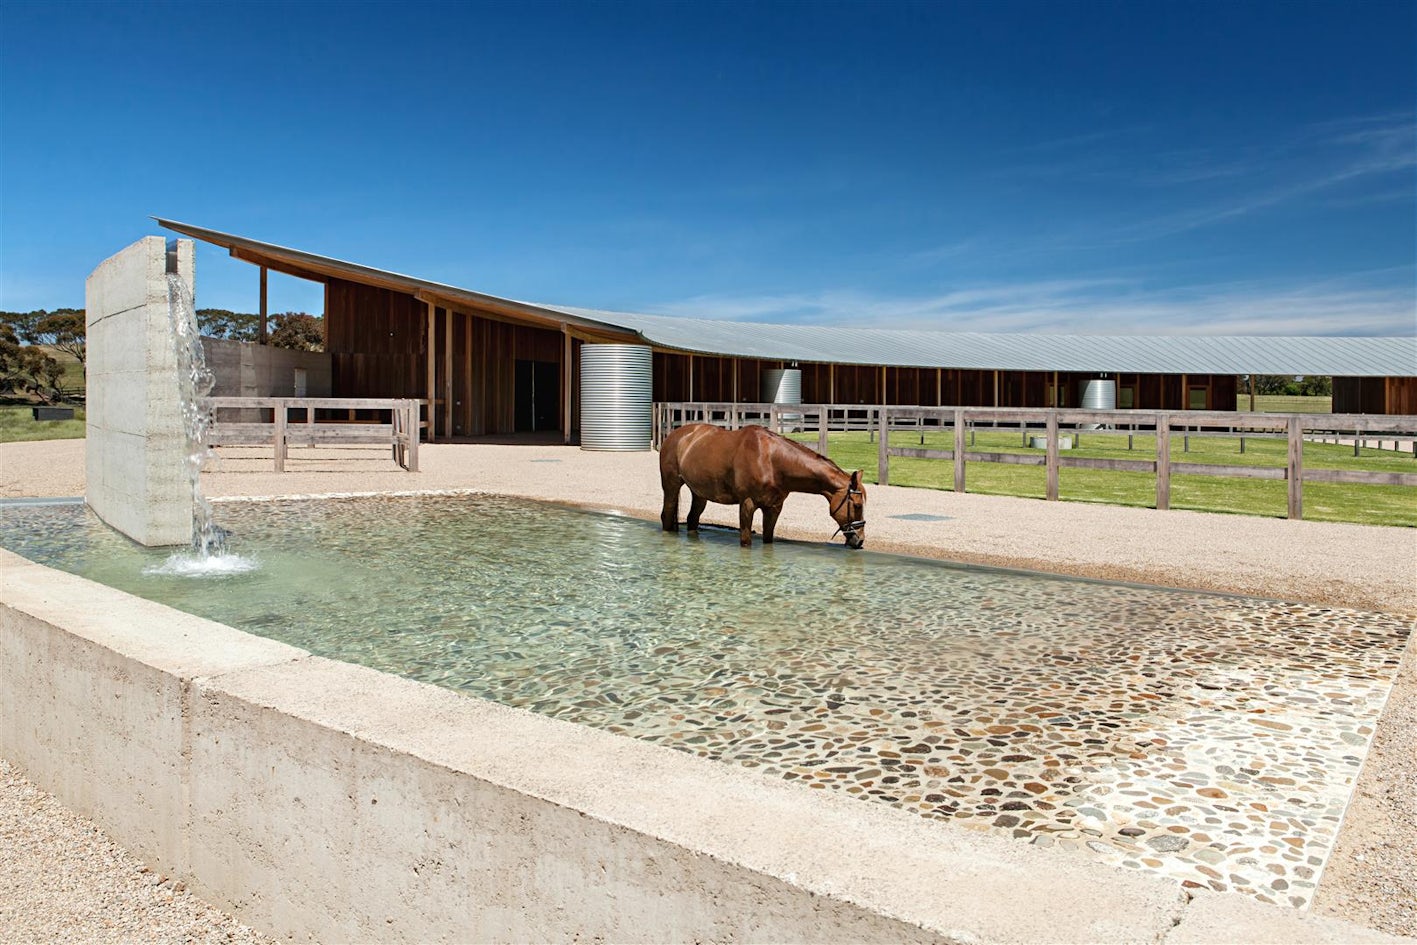 Horsing Around: 8 Swanky Stables - Architizer Journal